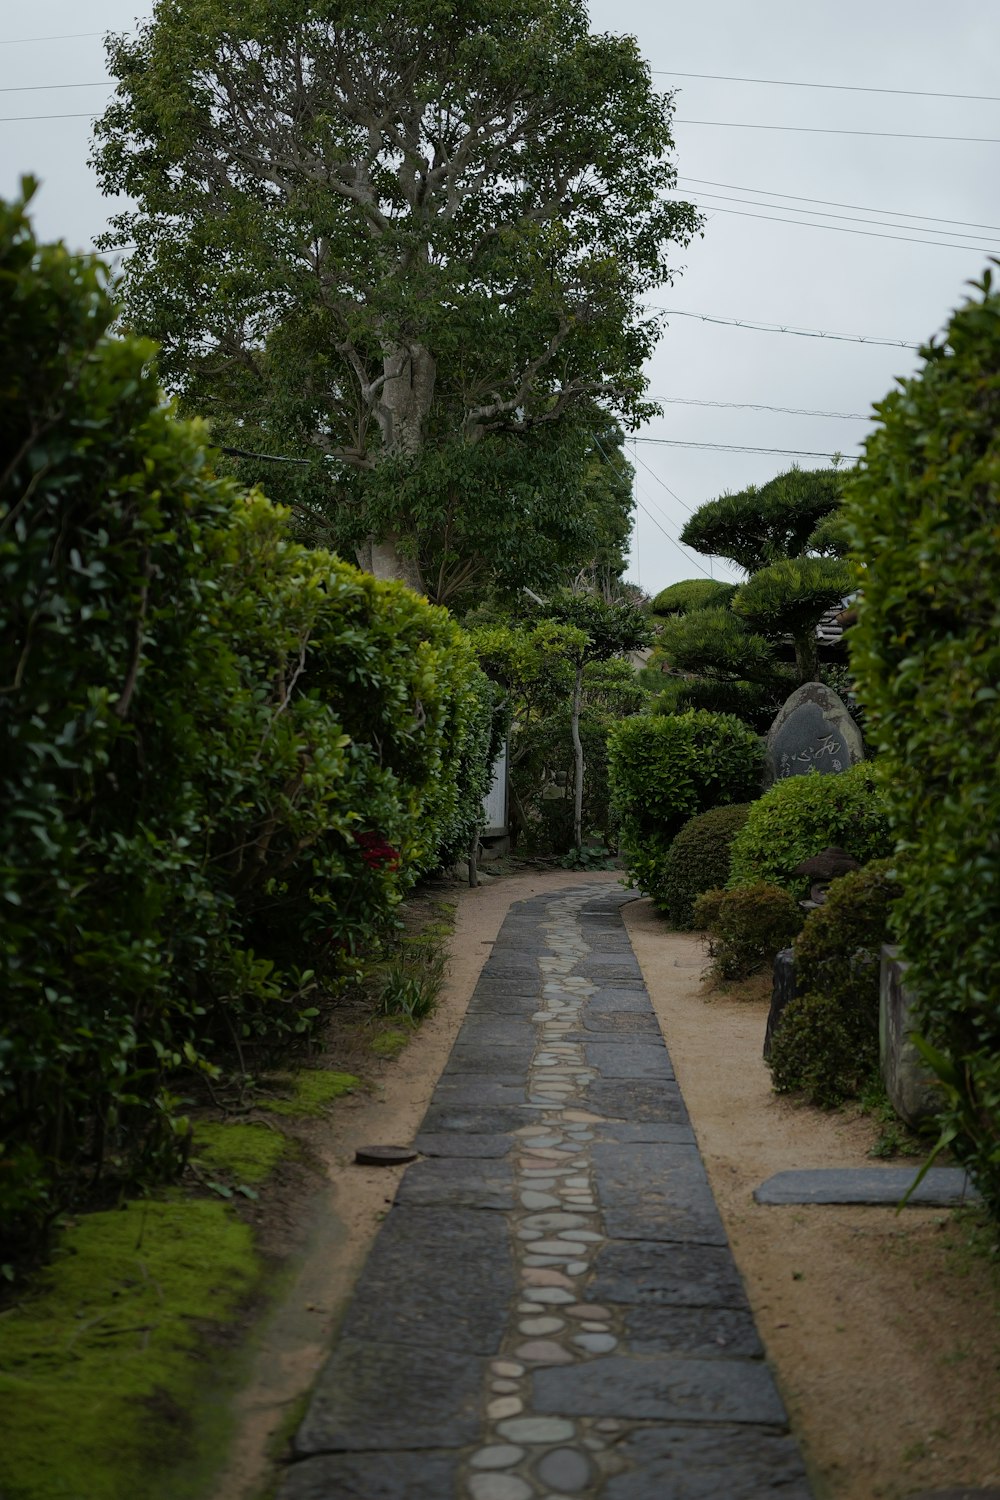 a stone path in a garden with a tree in the background